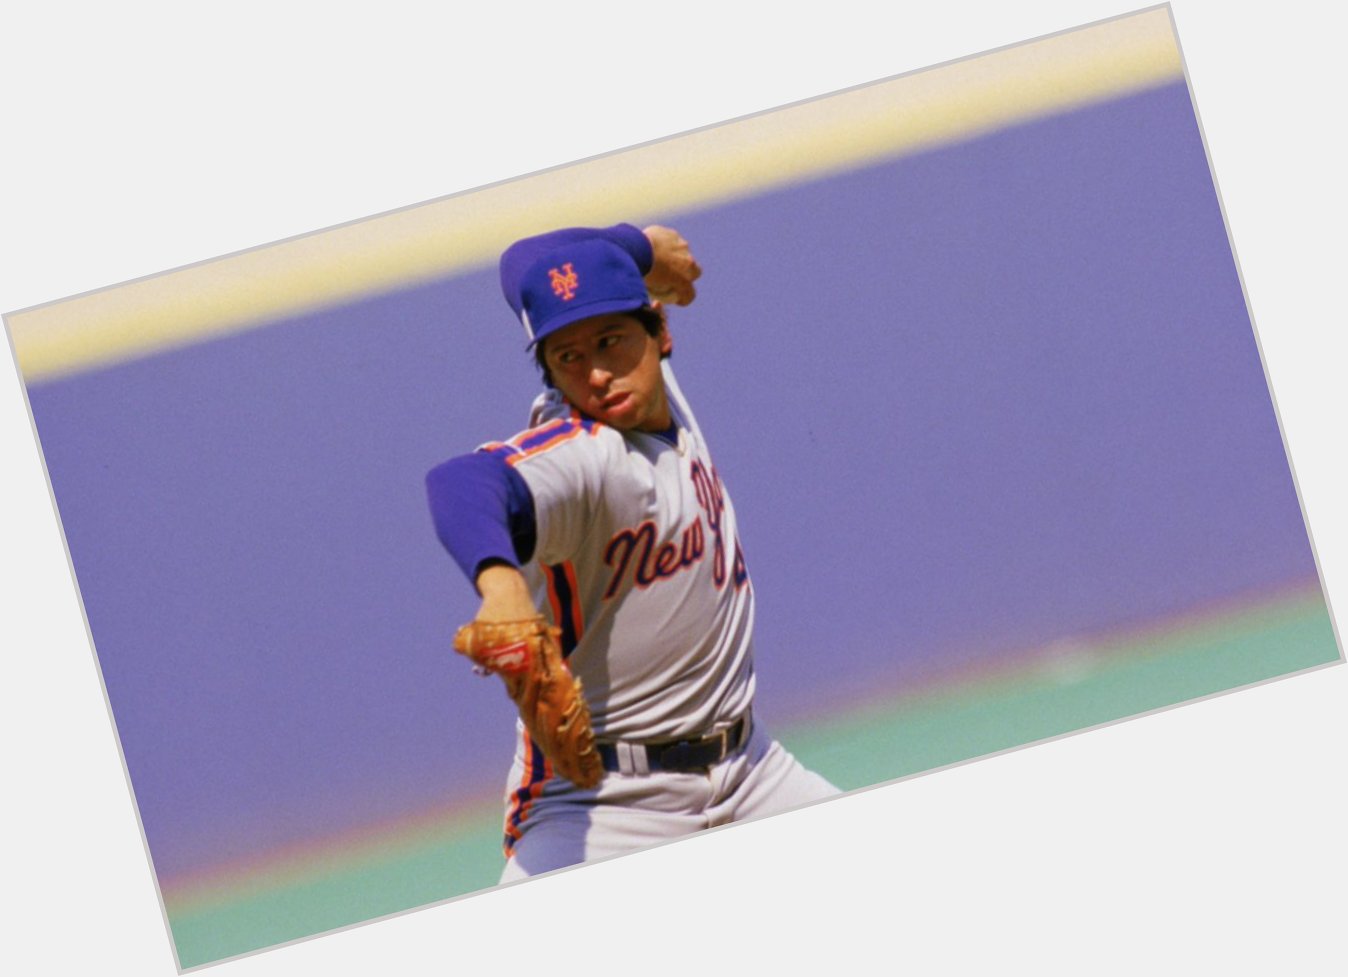 Happy 58th birthday to Jesse Orosco, who pitched in more games than any player in MLB history. 